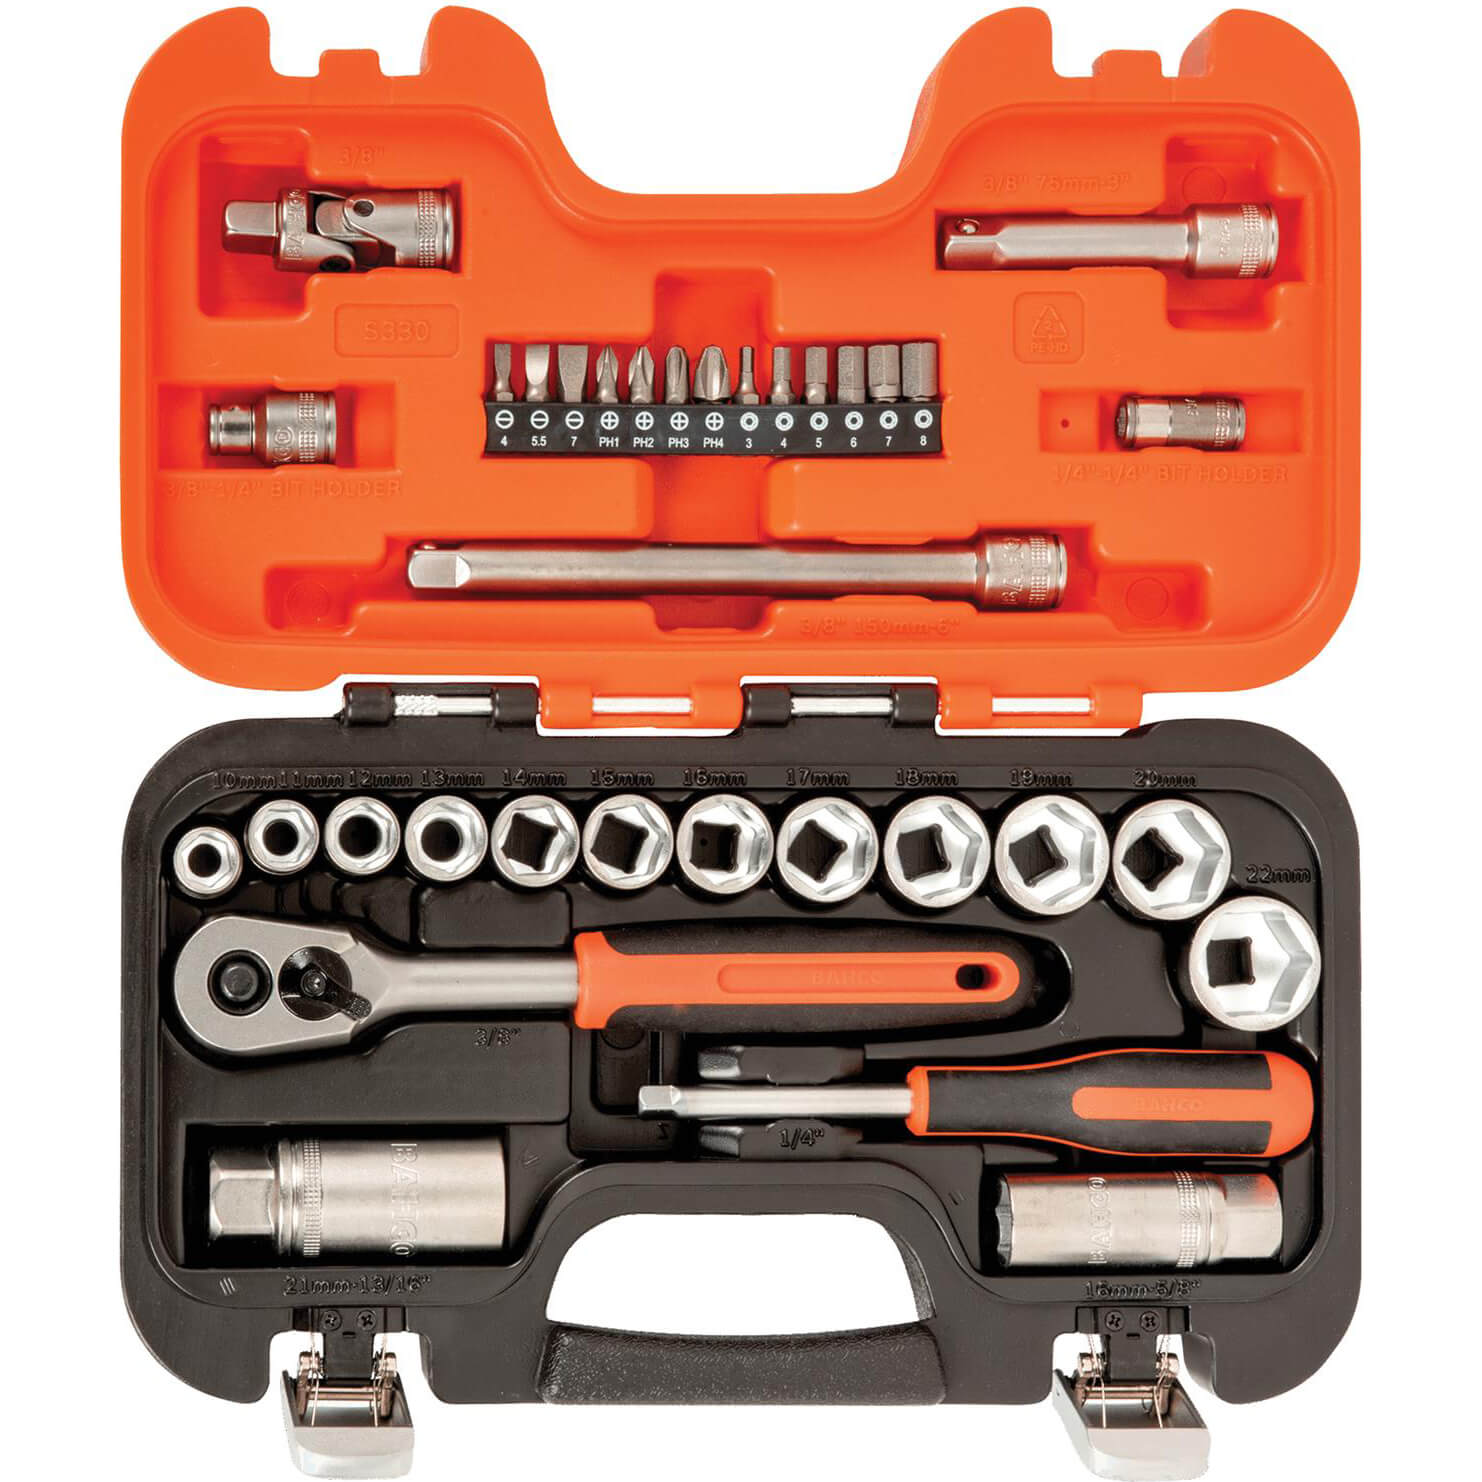 Bahco S330 34 Piece 1/4In and 3/8In Drive Socket Set Combination